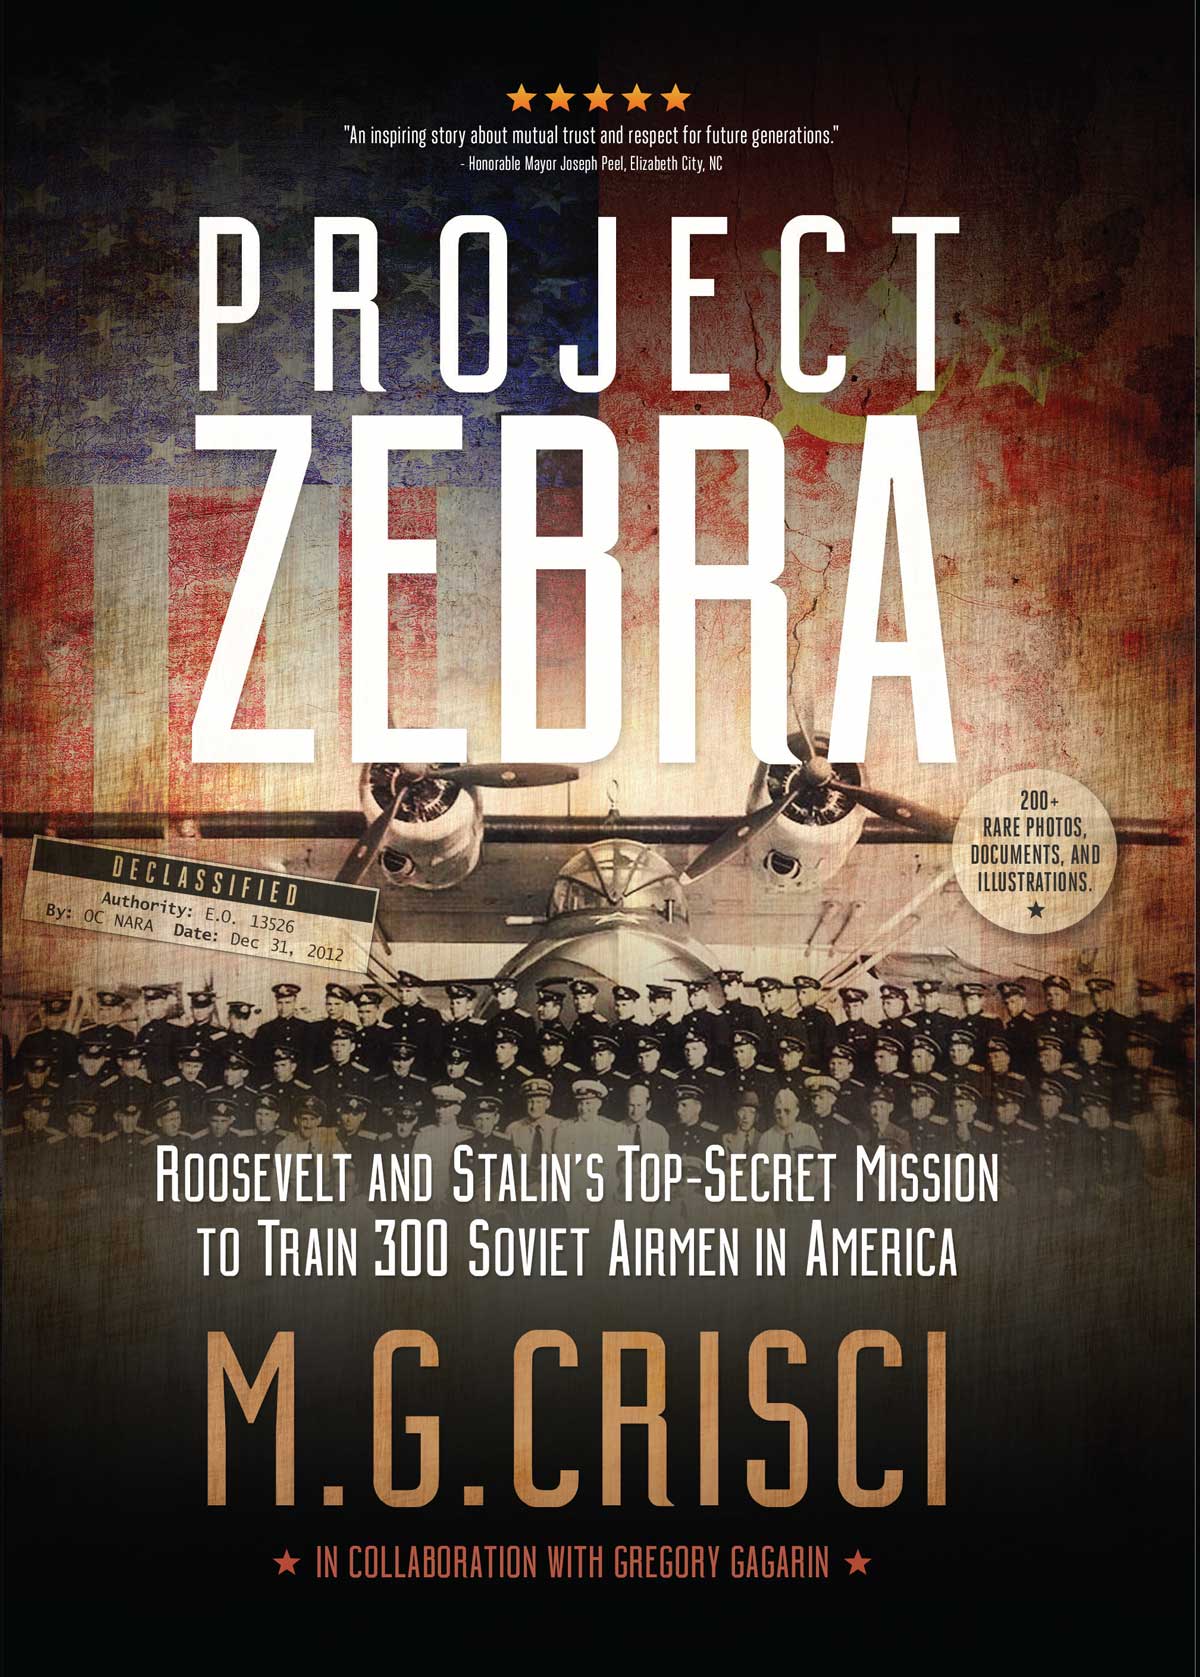 Project Zebra. Roosevelt and Stalin's Secret Mission to Train 300 Soviet Airmen in America.